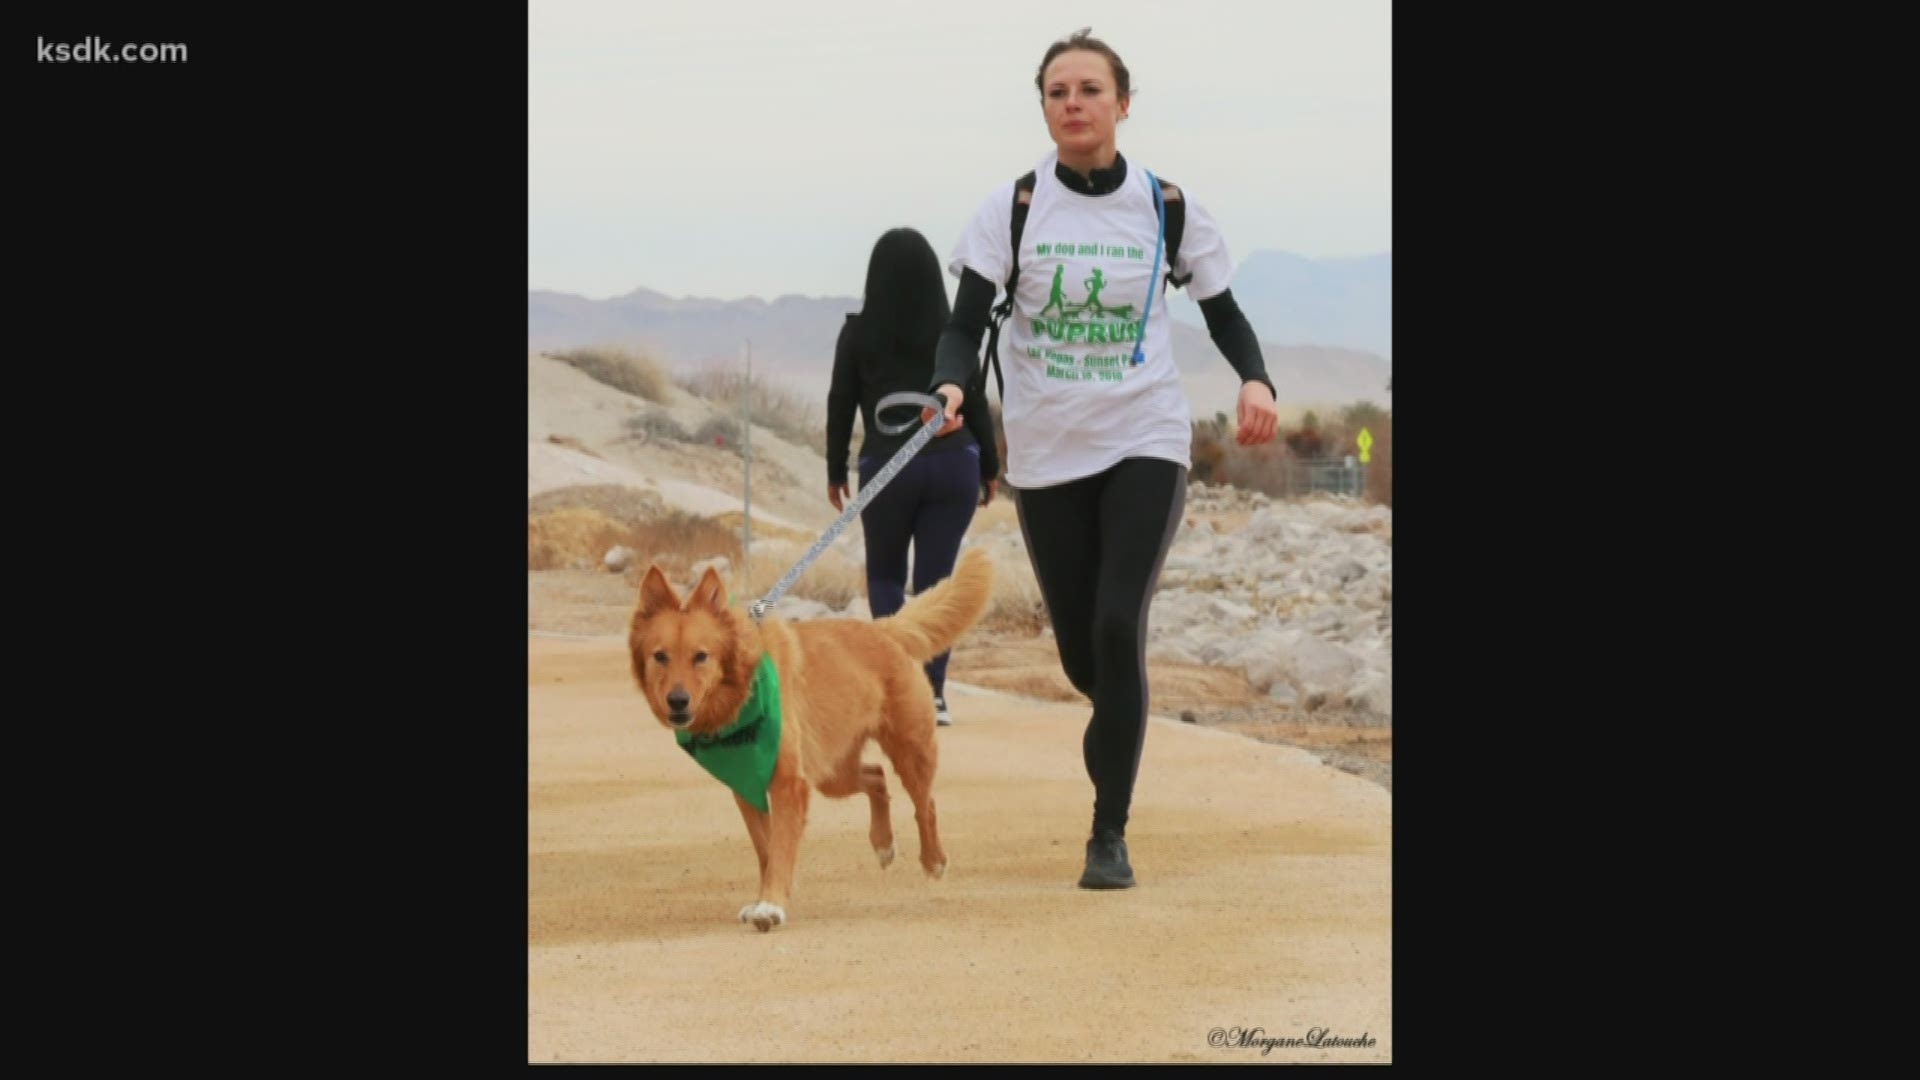 The Pup Run is Saturday, March 14, 2020 in Forest Park. For more information and to register, visit PupRunUSA.com.